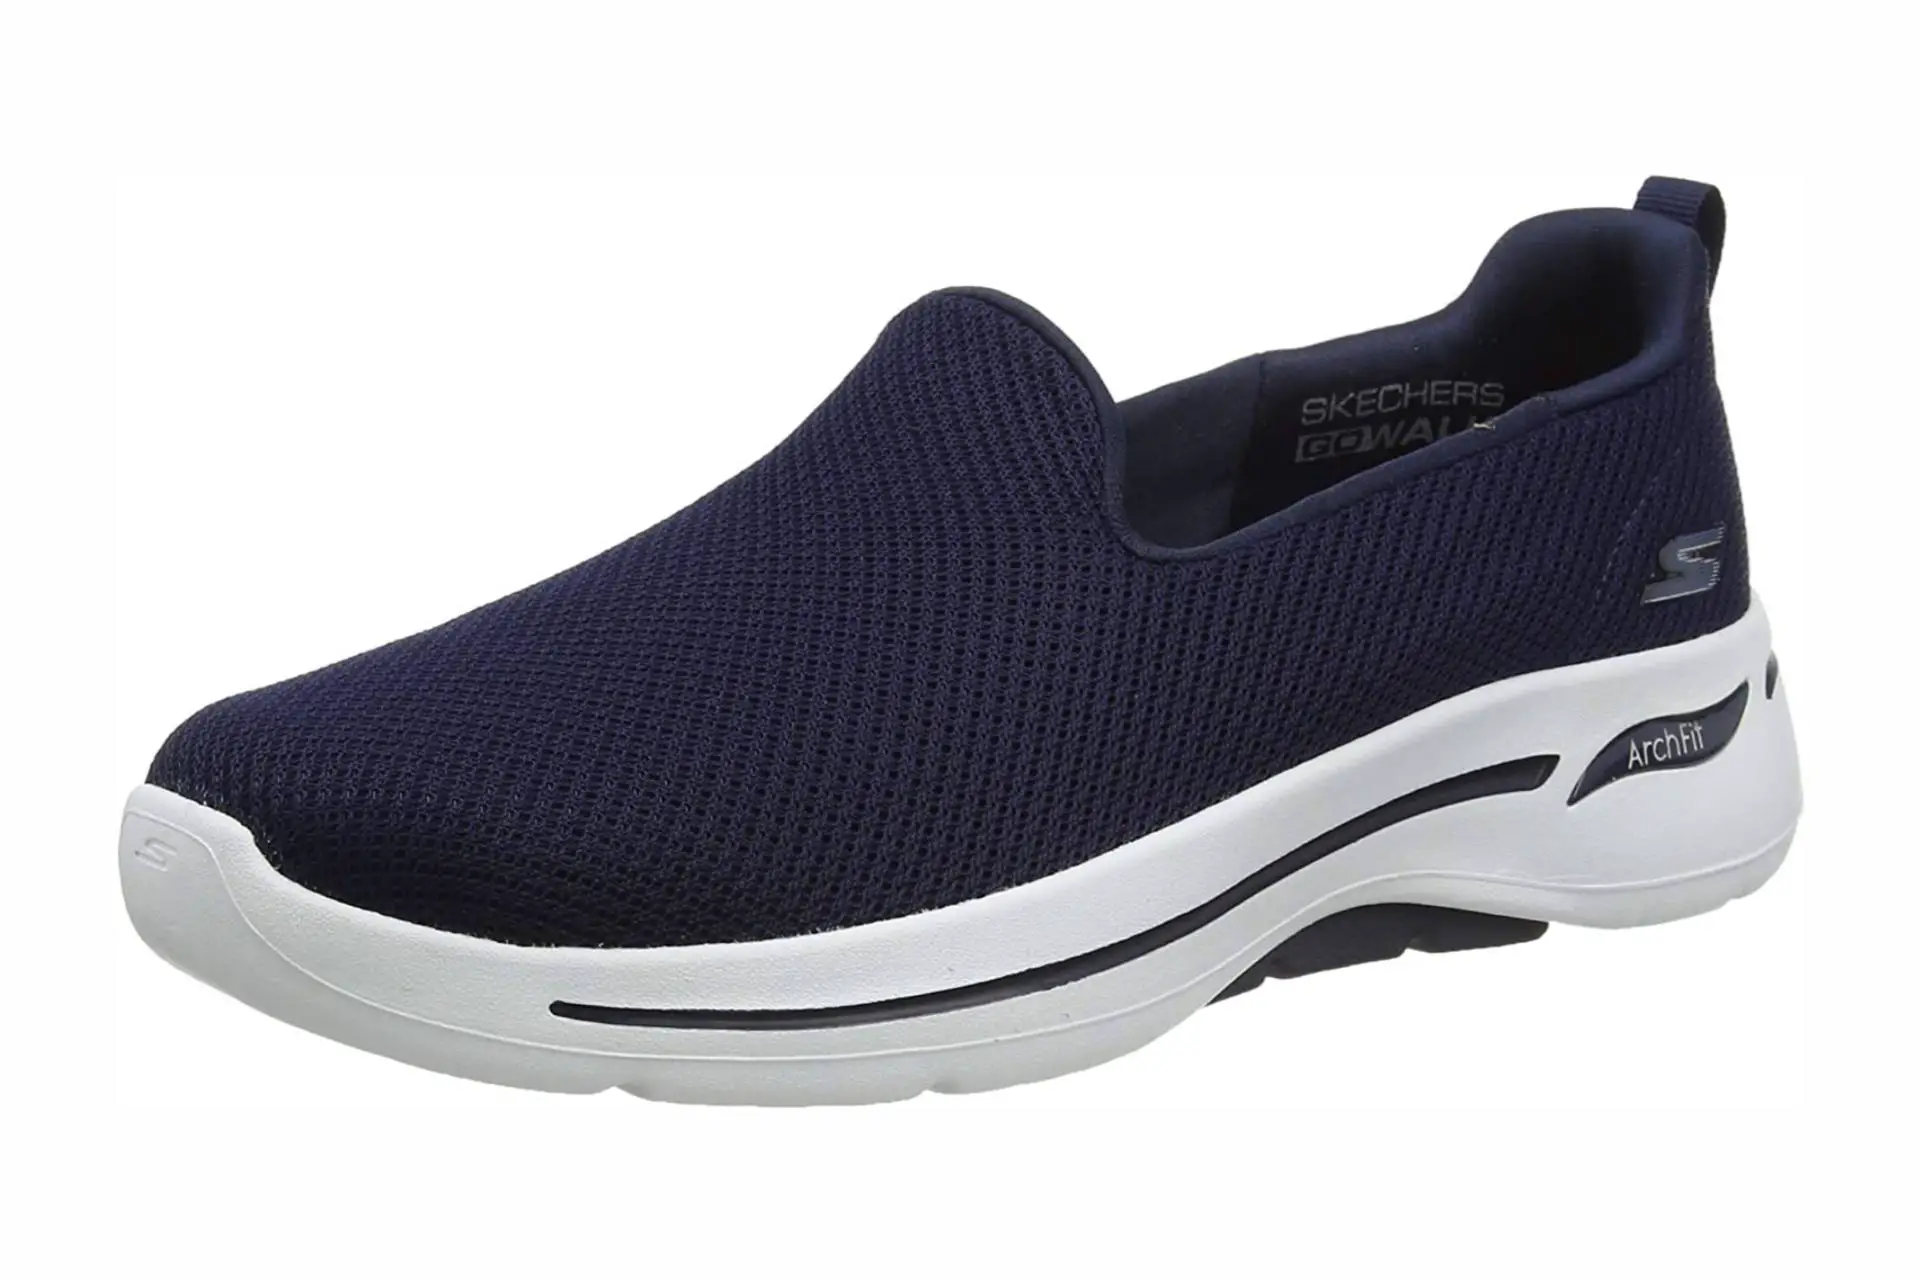 Best skechers for arch support